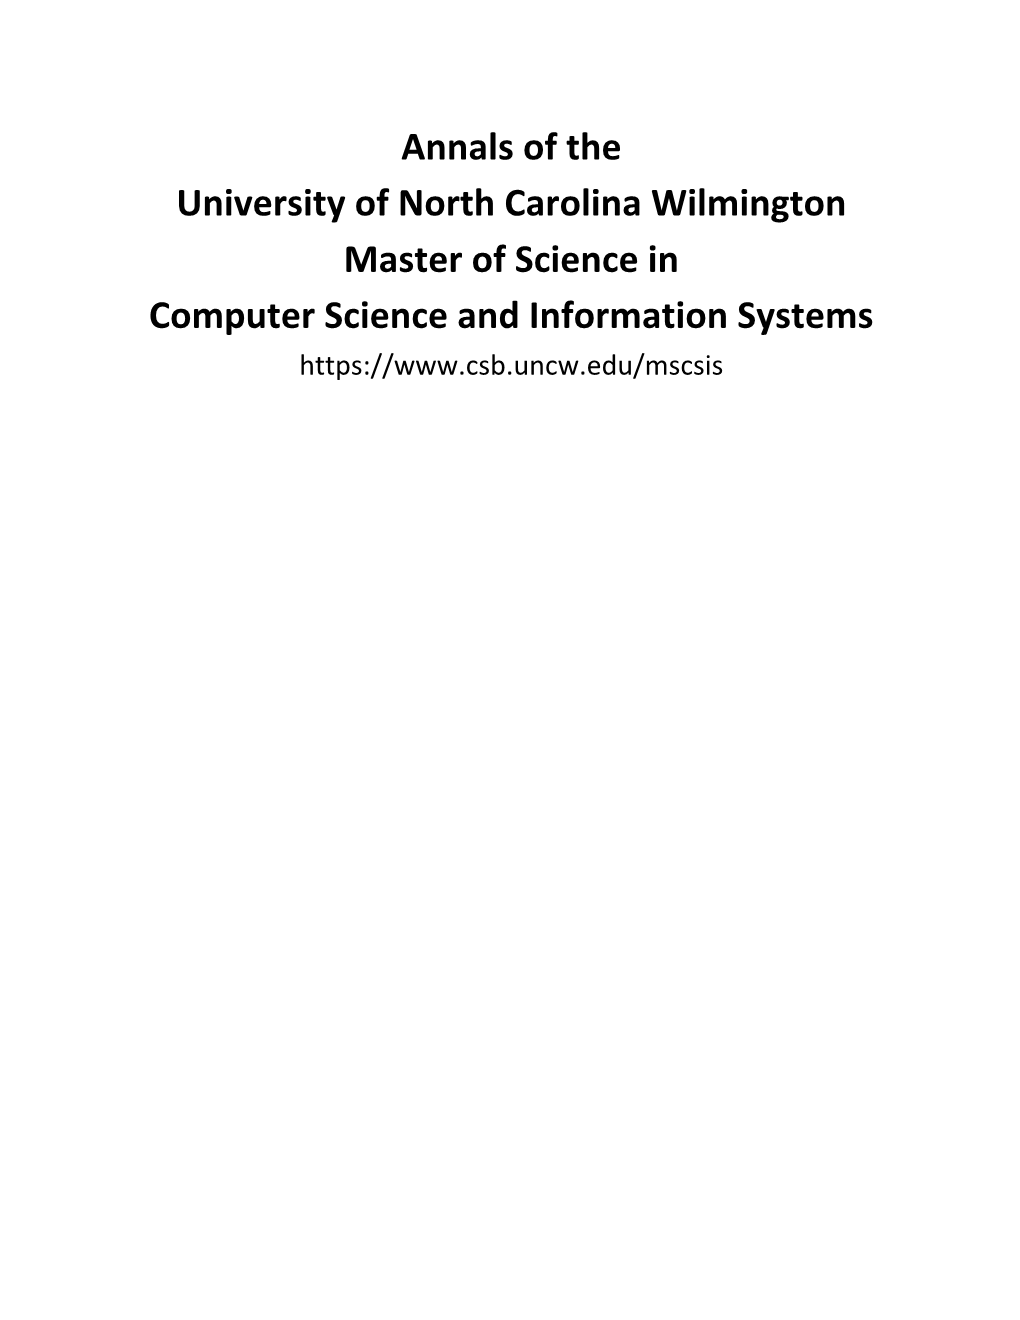 Annals of the University of North Carolina Wilmington Master of Science in Computer Science and Information Systems